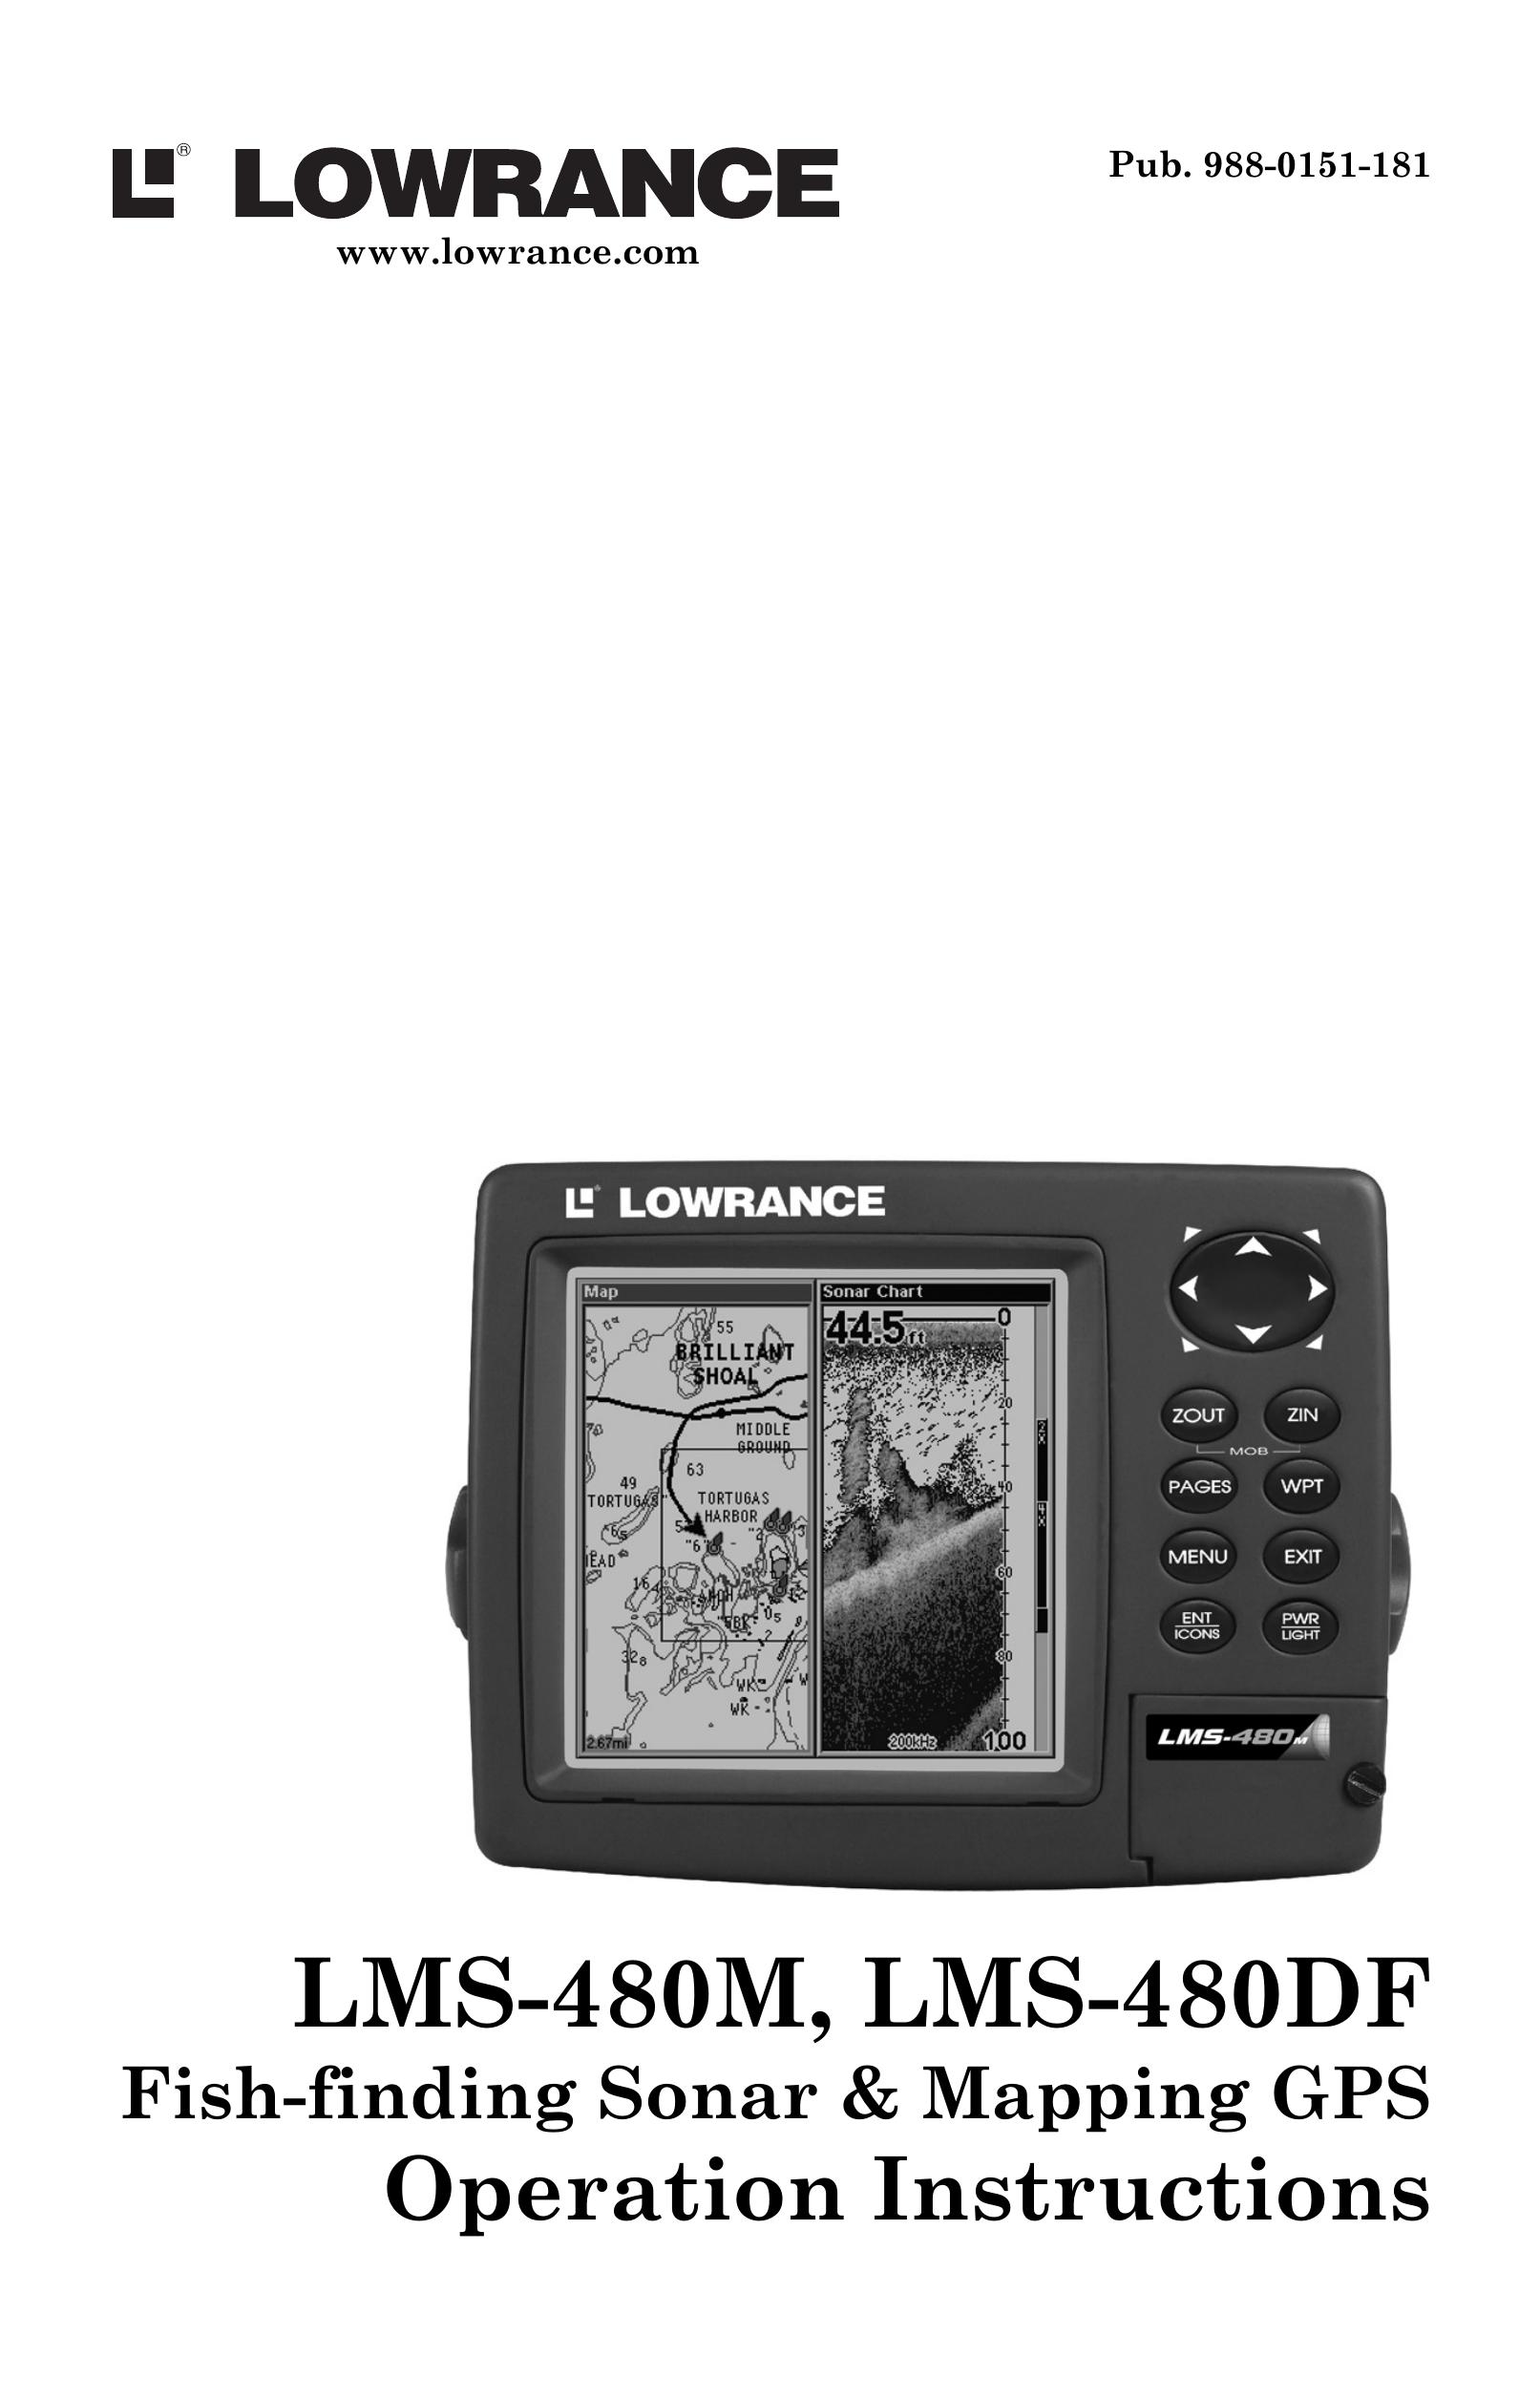 Lowrance electronic LMS-480M Fish Finder User Manual